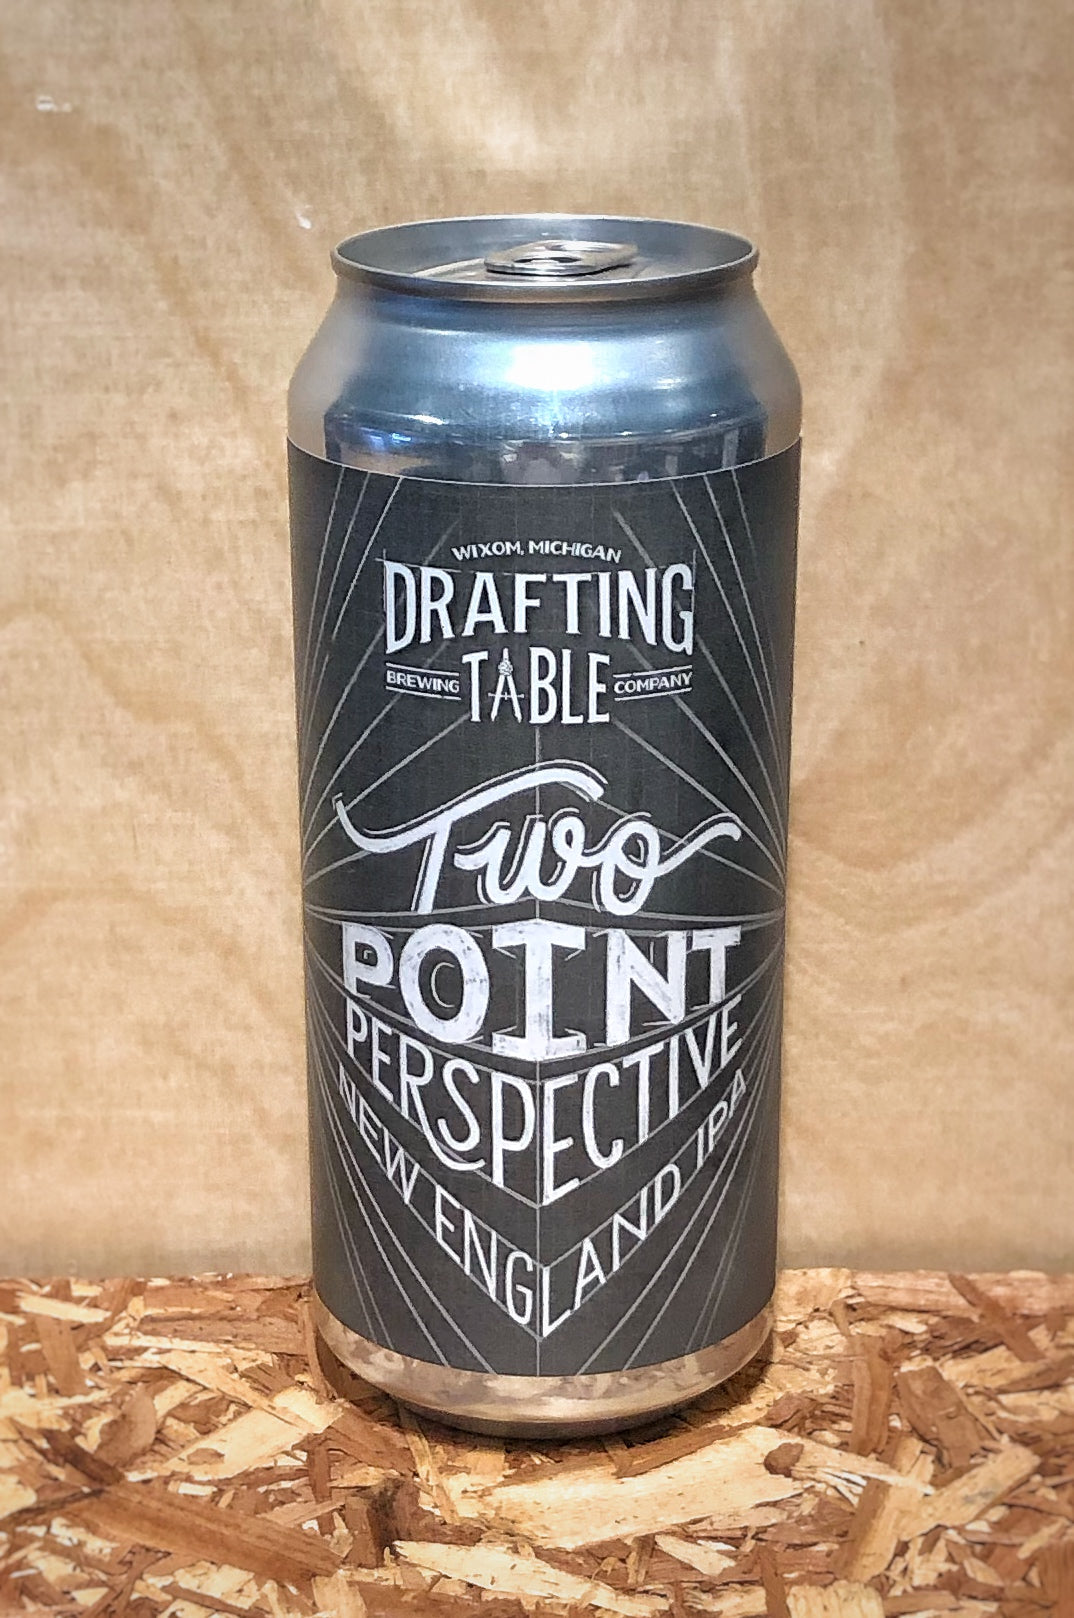 Drafting Table 'Two Point Perspective' New England IPA (Wixom, MI)